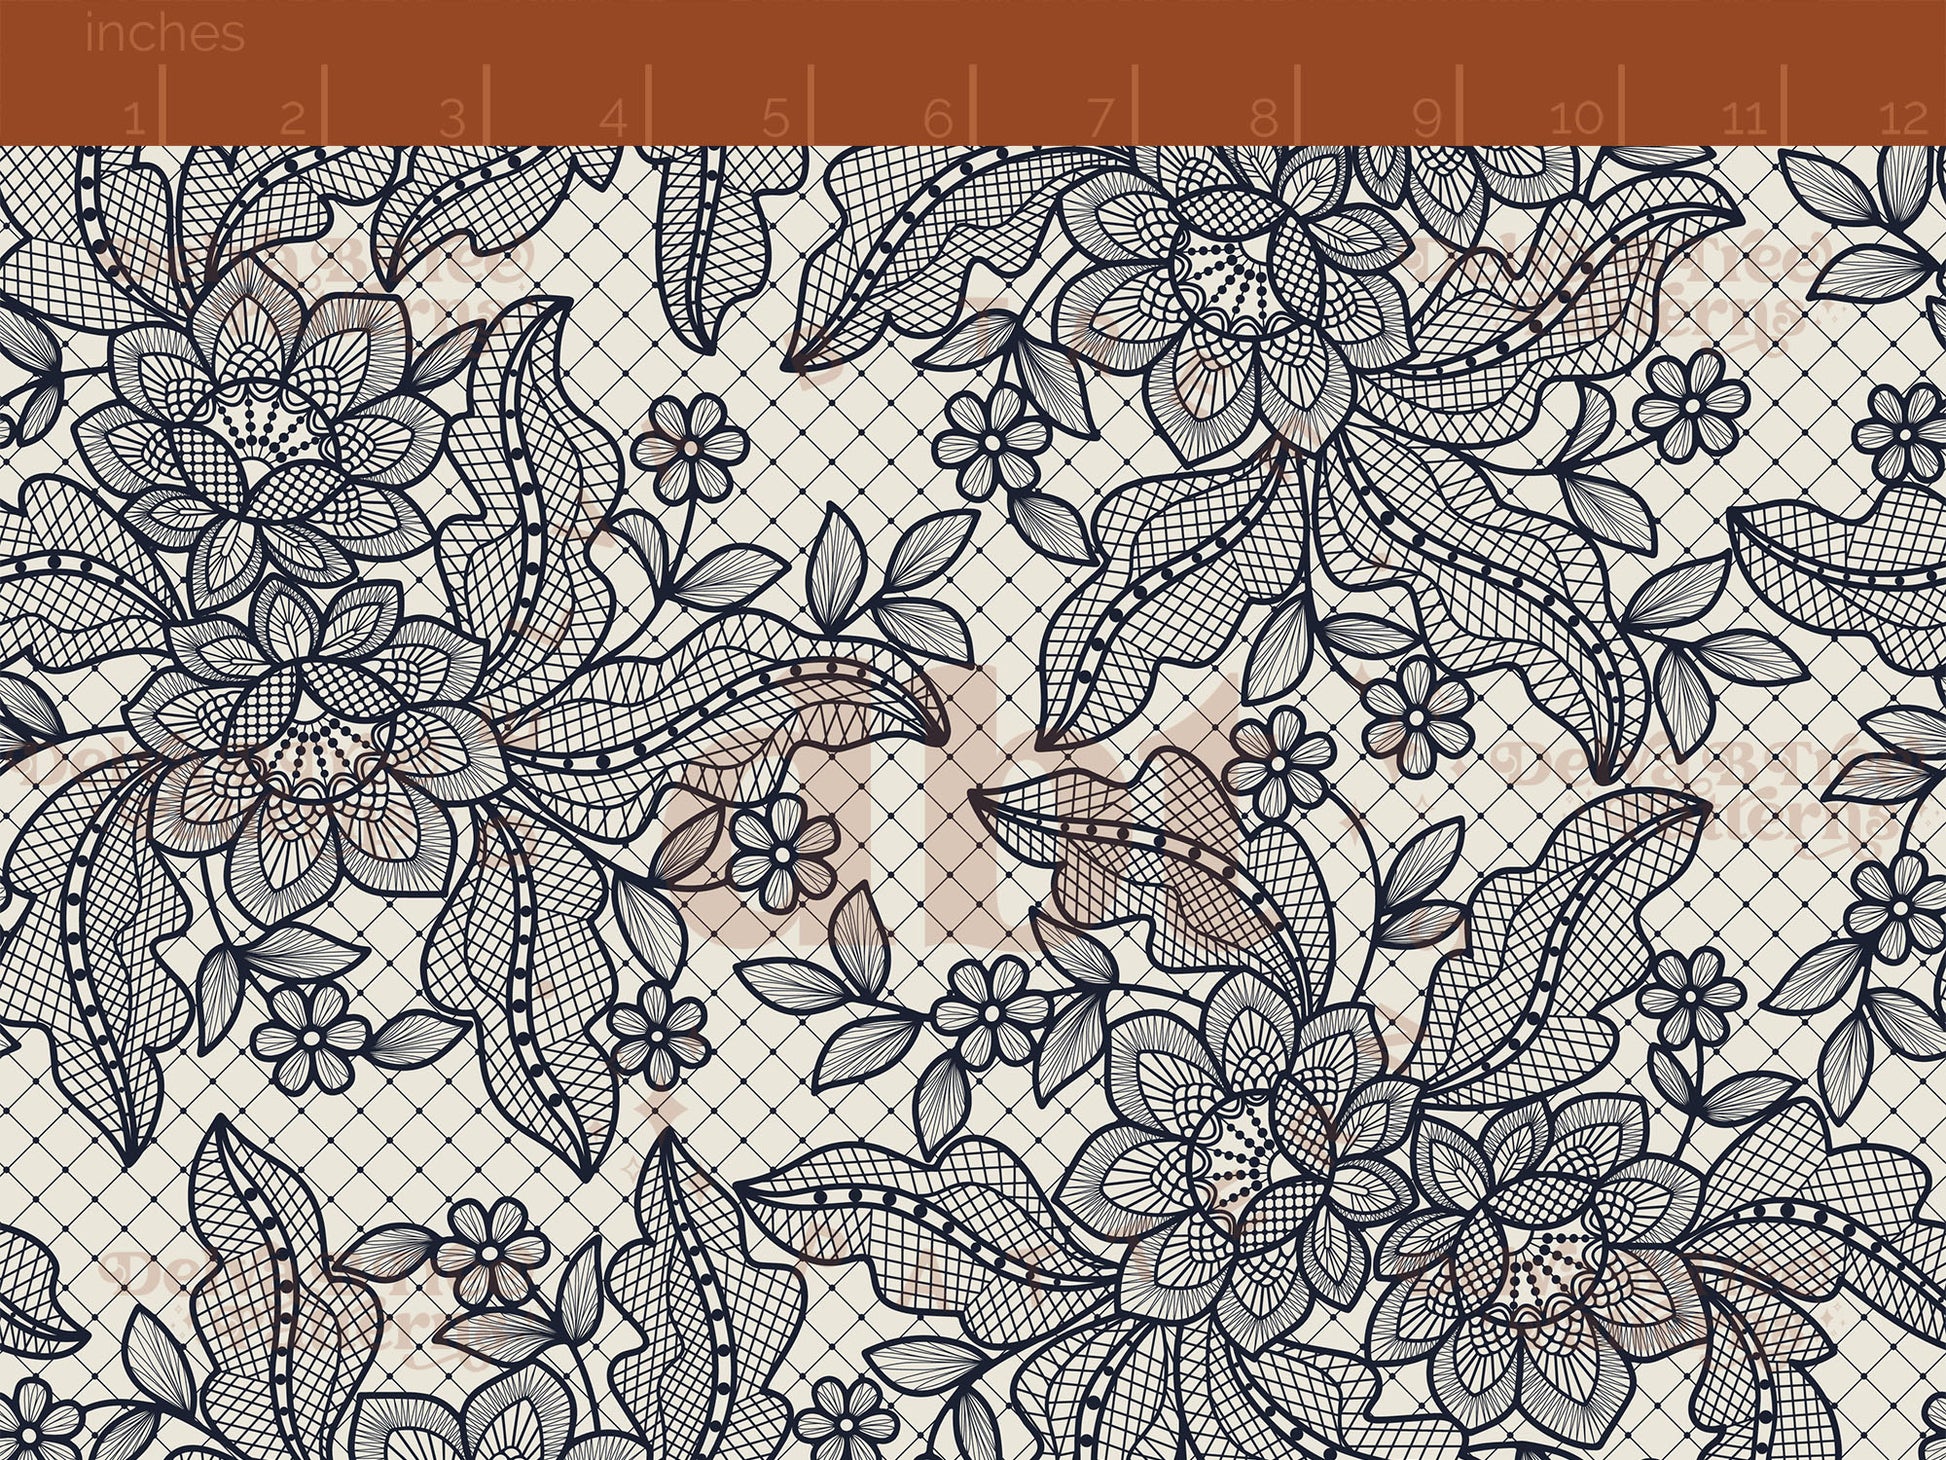 Seamless Design File features navy blue faux flower lacework on an